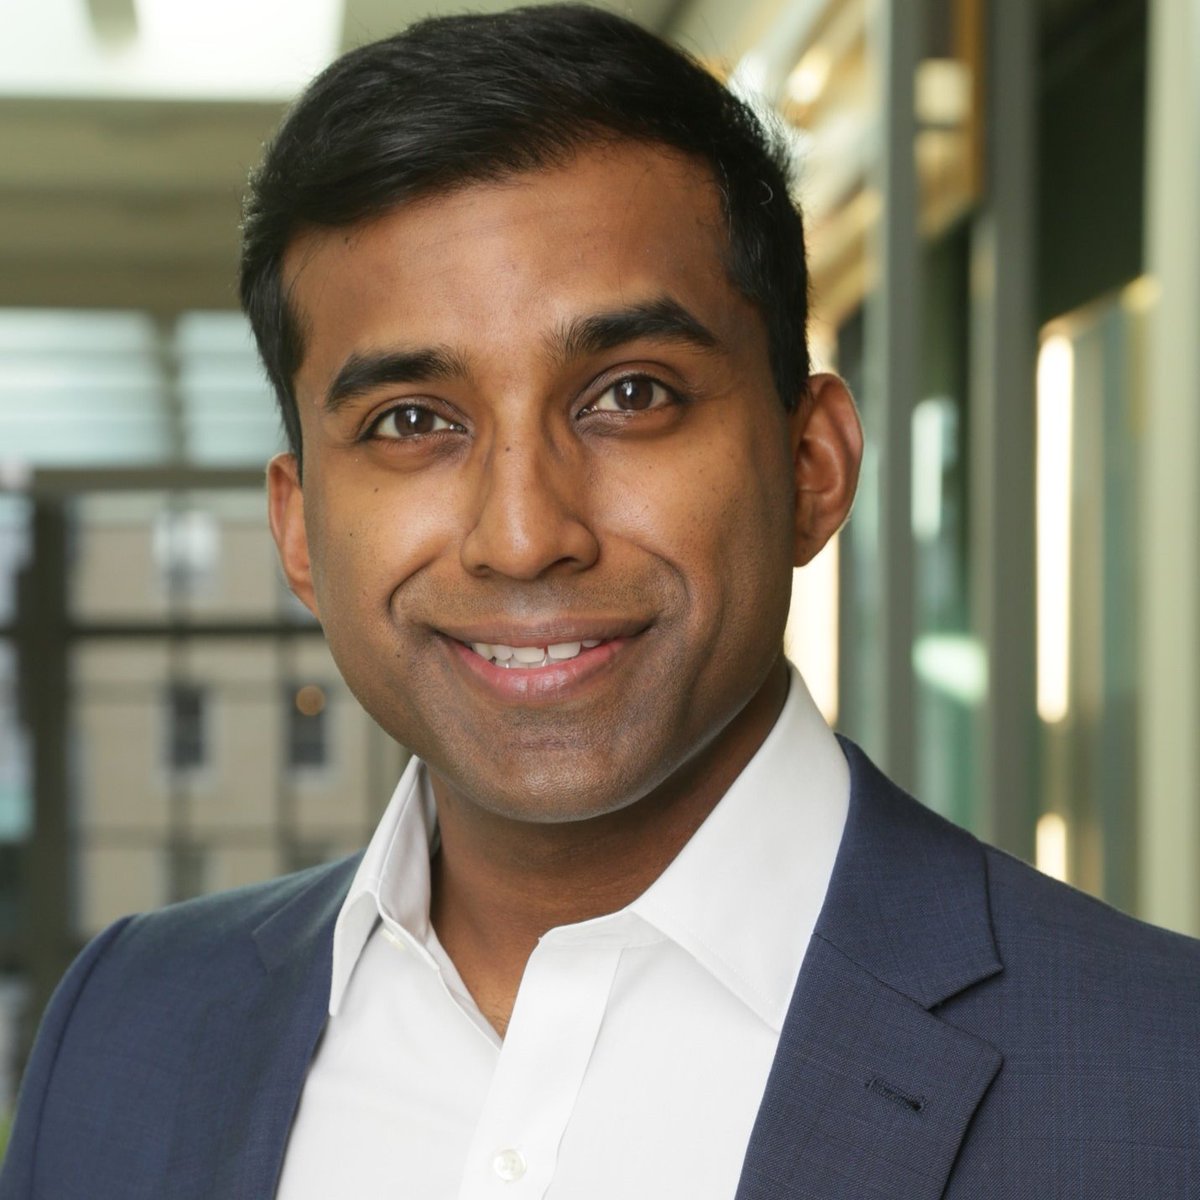 Clinical inertia may contribute to inadequate care in patients with #cardiometabolic disease. Muthiah Vaduganathan, MD, MPH, explores the merits of upfront combination medical therapy. 📅 TUE 1 NOV ⏰ 8am ET 🎙️ hosted by @rohan_khera Grand Rounds info: buff.ly/3TUkWrV